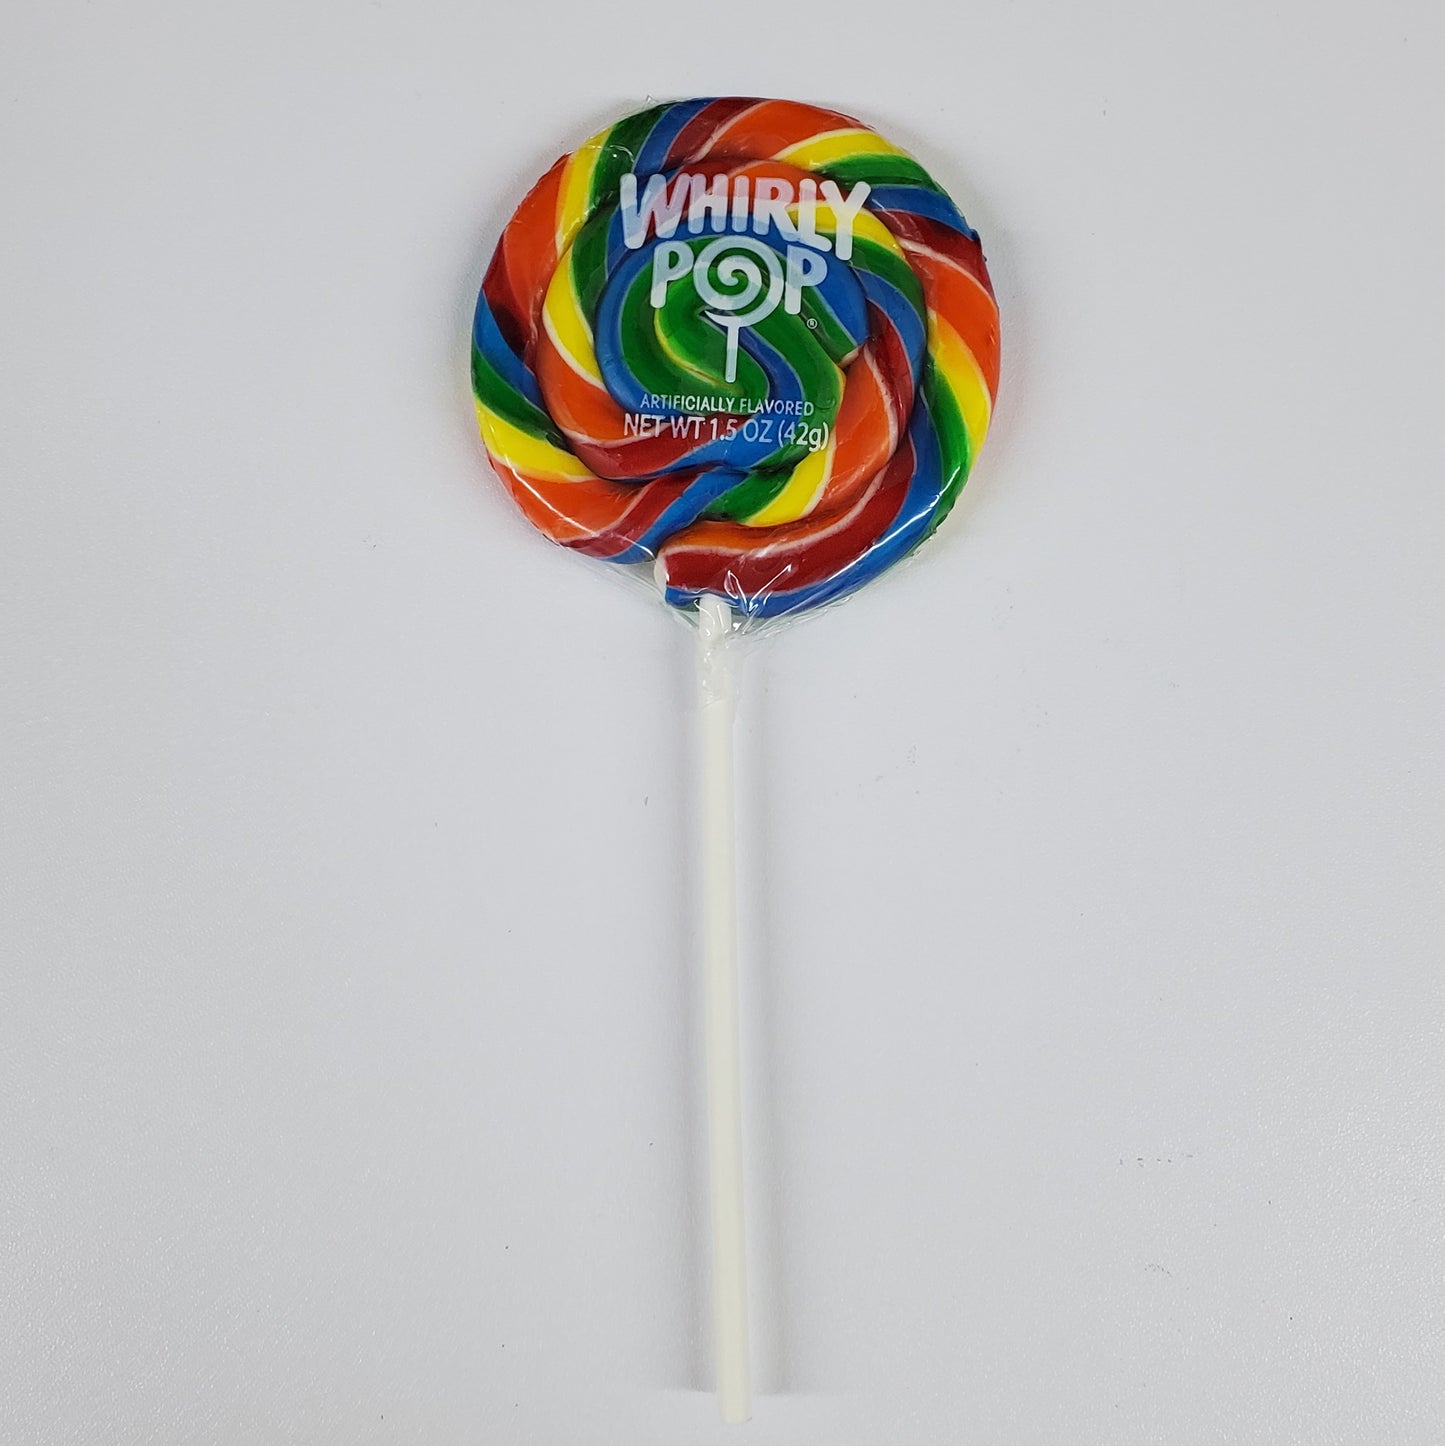 1.5 ounce Whirly Pop